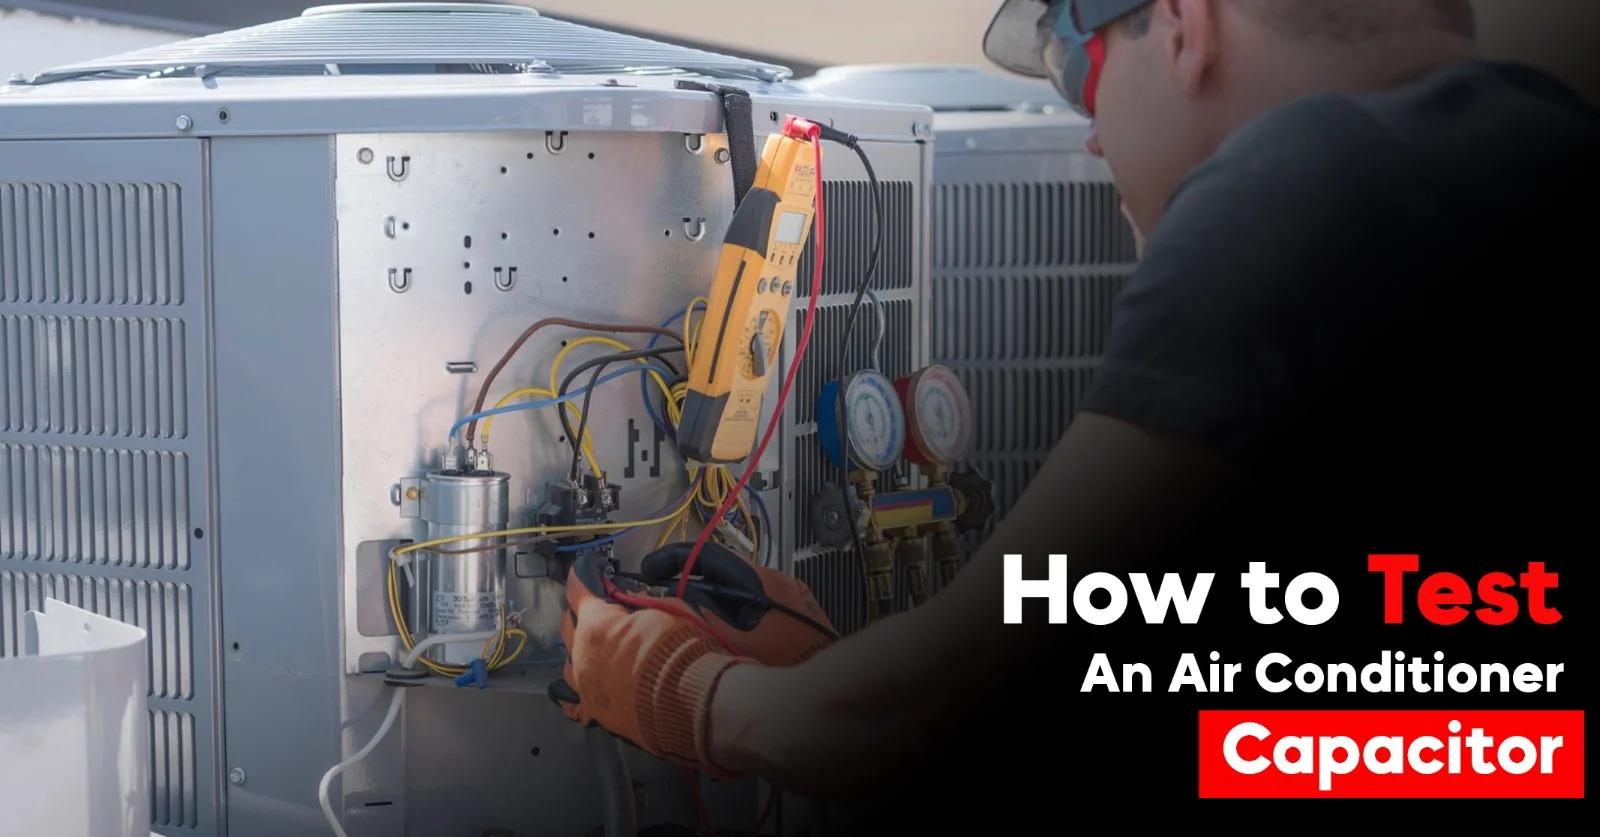 How to Test an Air Conditioner Capacitor